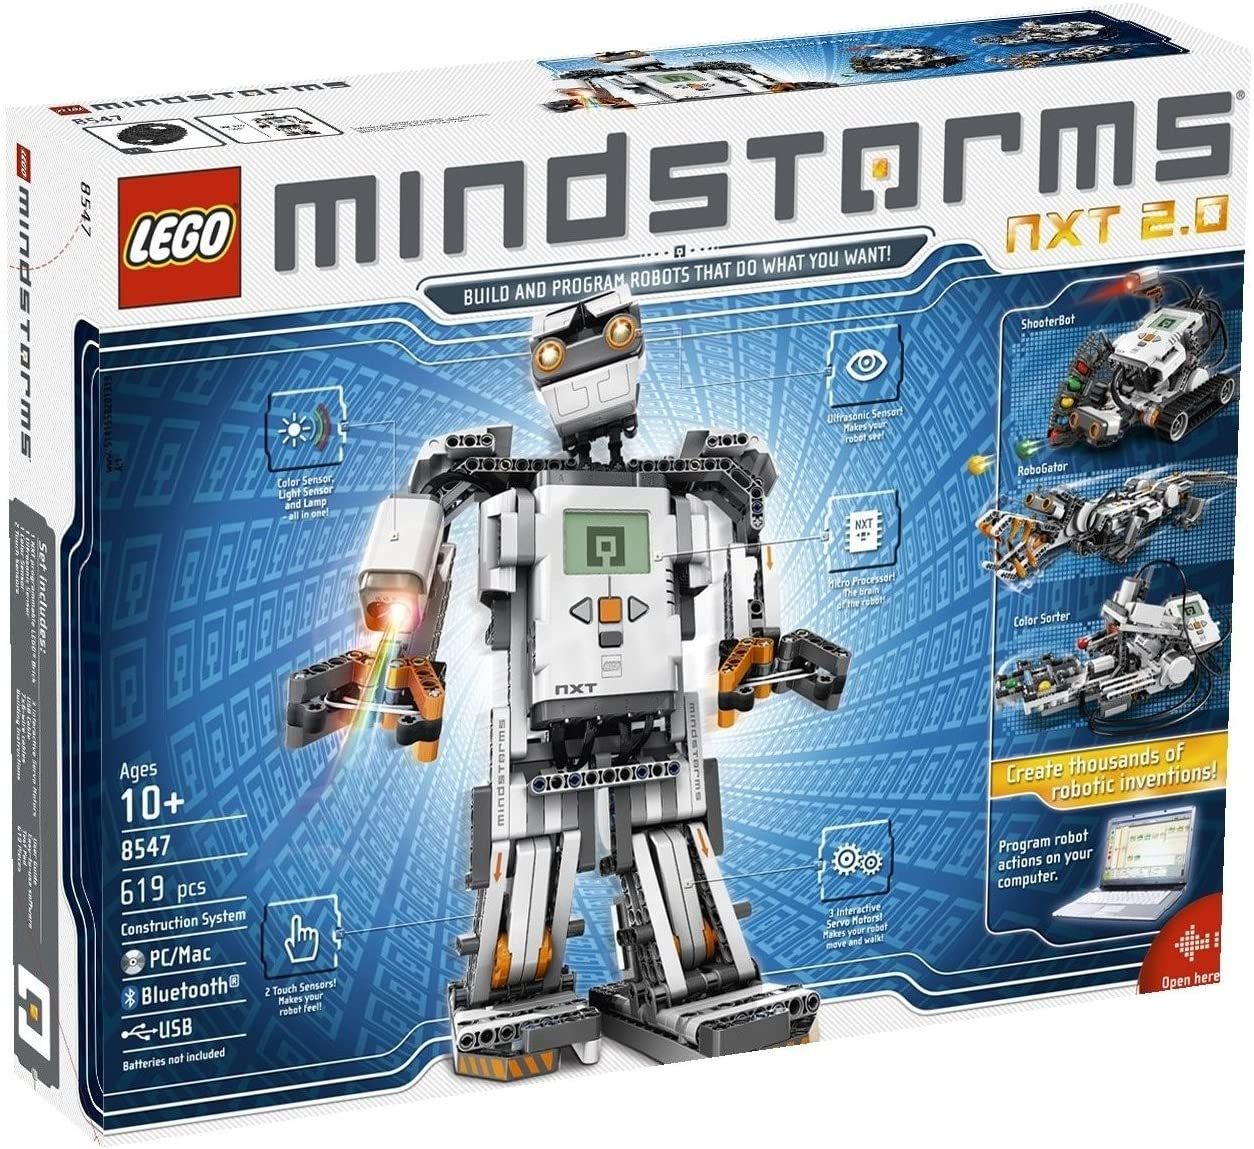 The Lego Mindstorms NXT Box